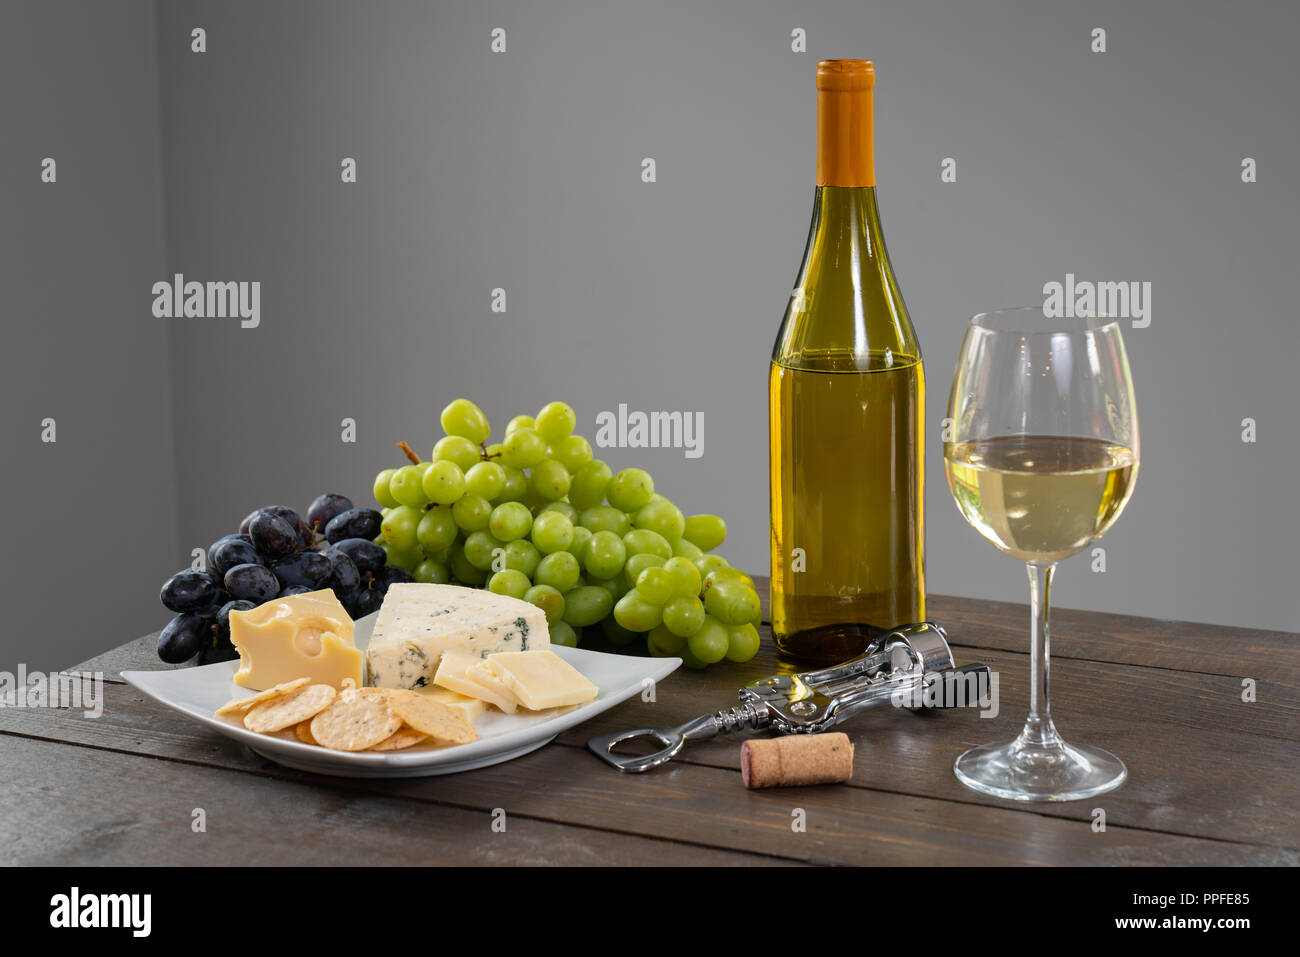 Glass of white wine with wine bottle, cheese and grapes Stock Photo